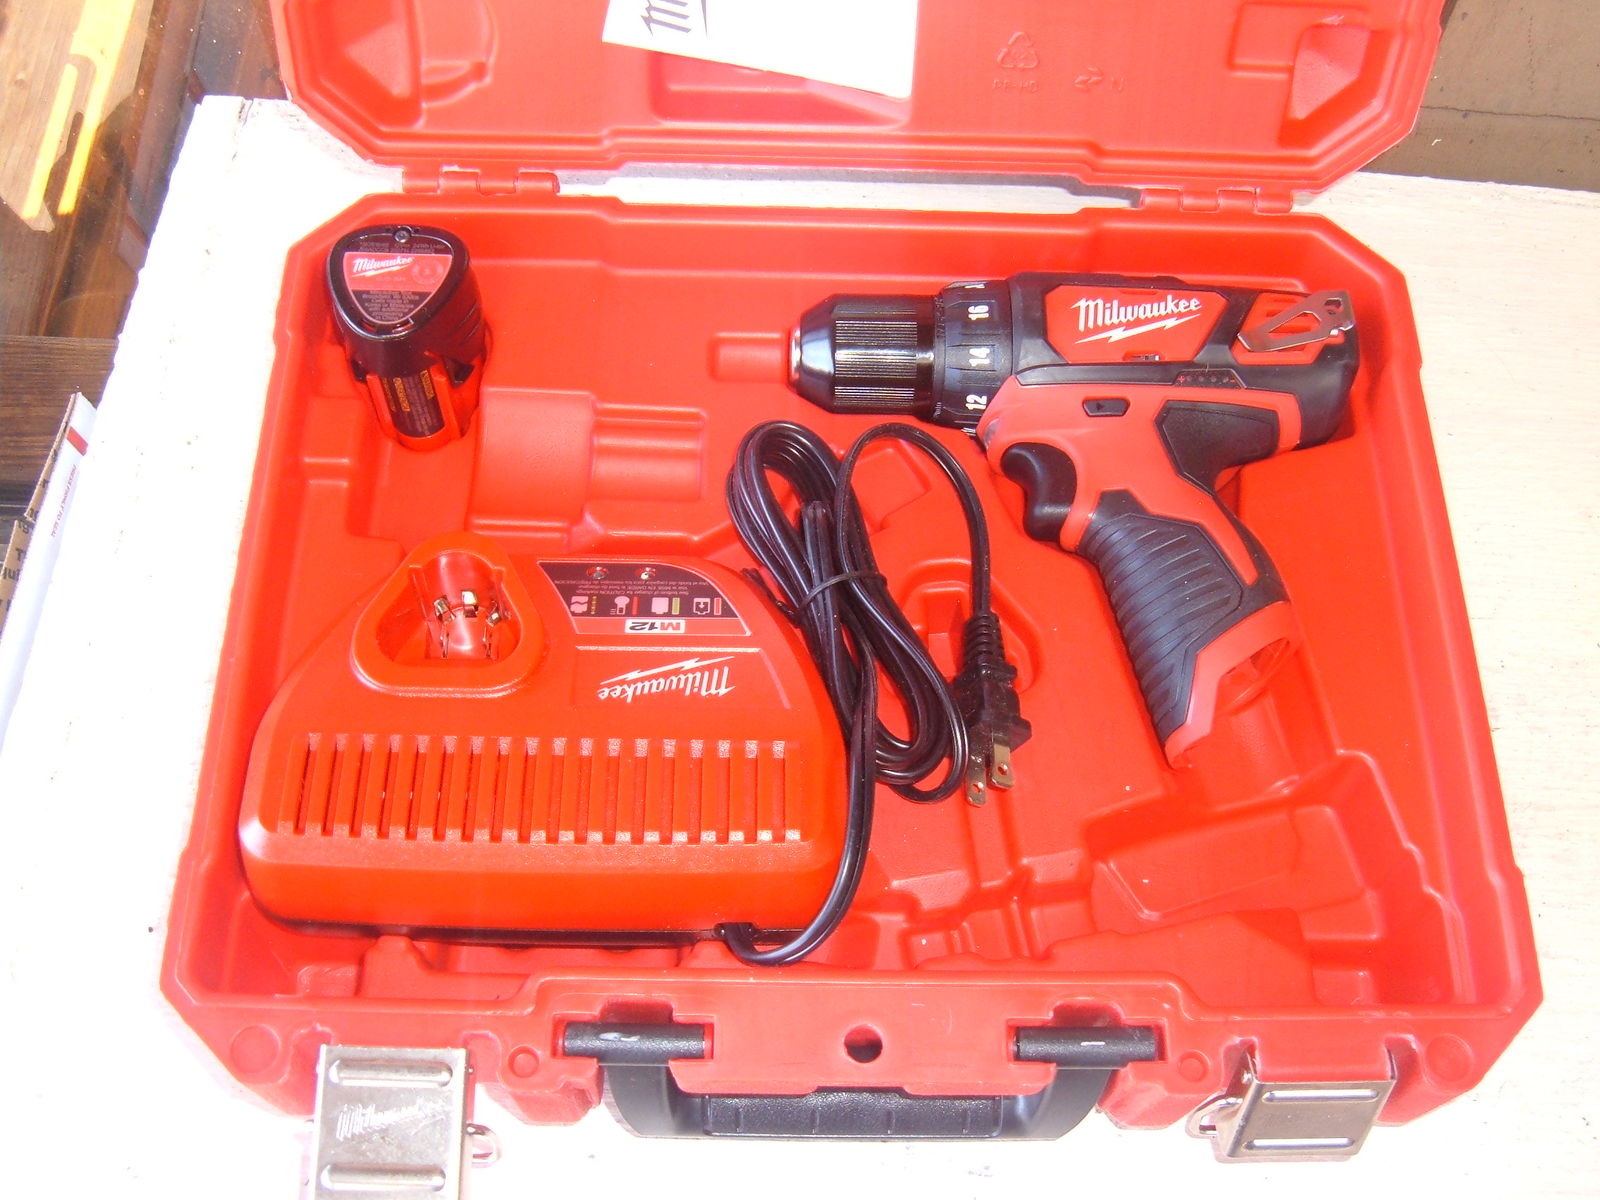 Milwaukee M12 2407-20 3/8 DRILL-DRIVER, and 21 similar items